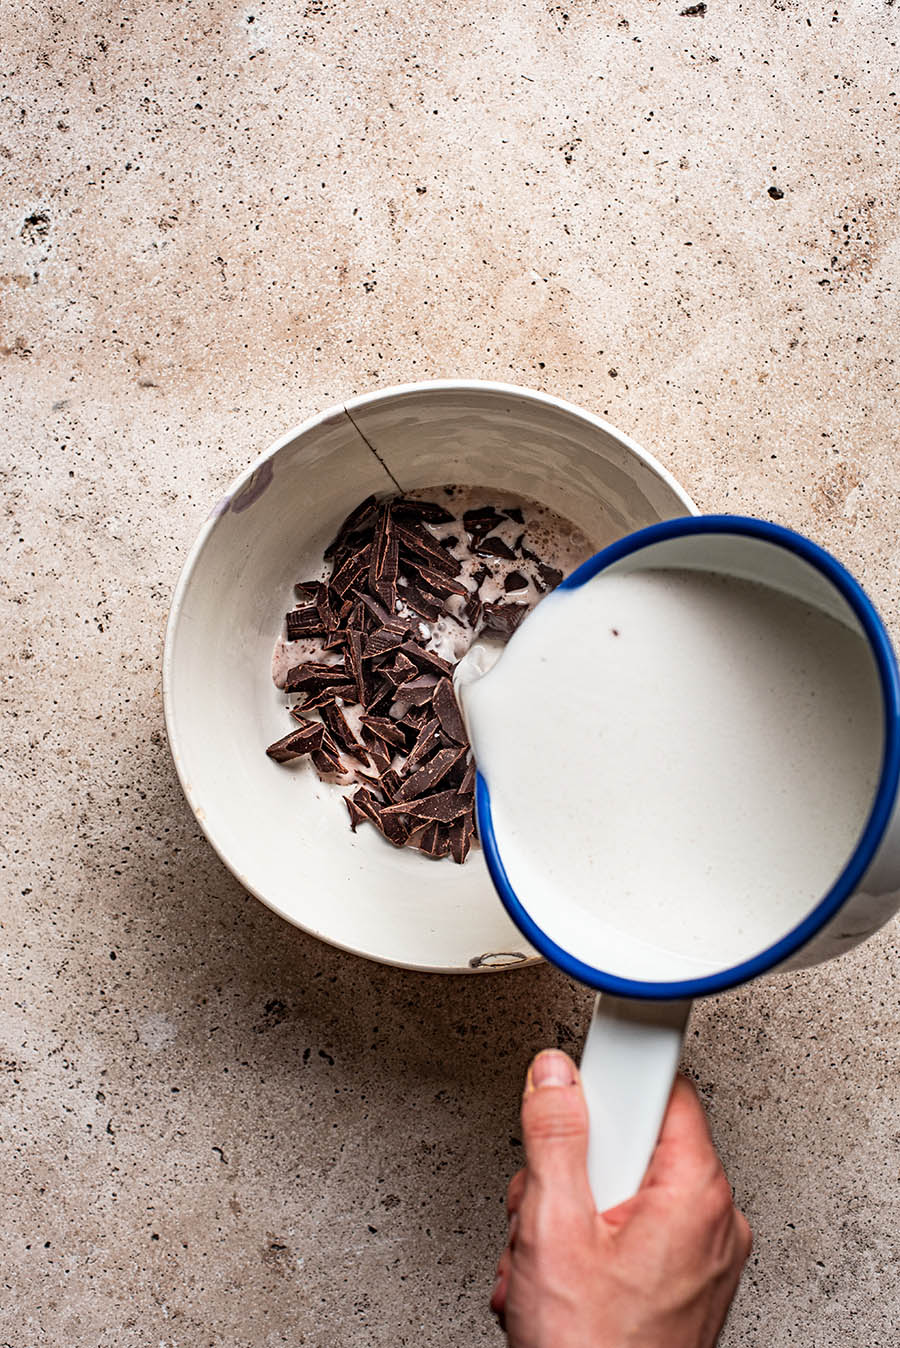 Hot coconut milk being poured over chopped chocolate in a bowl.